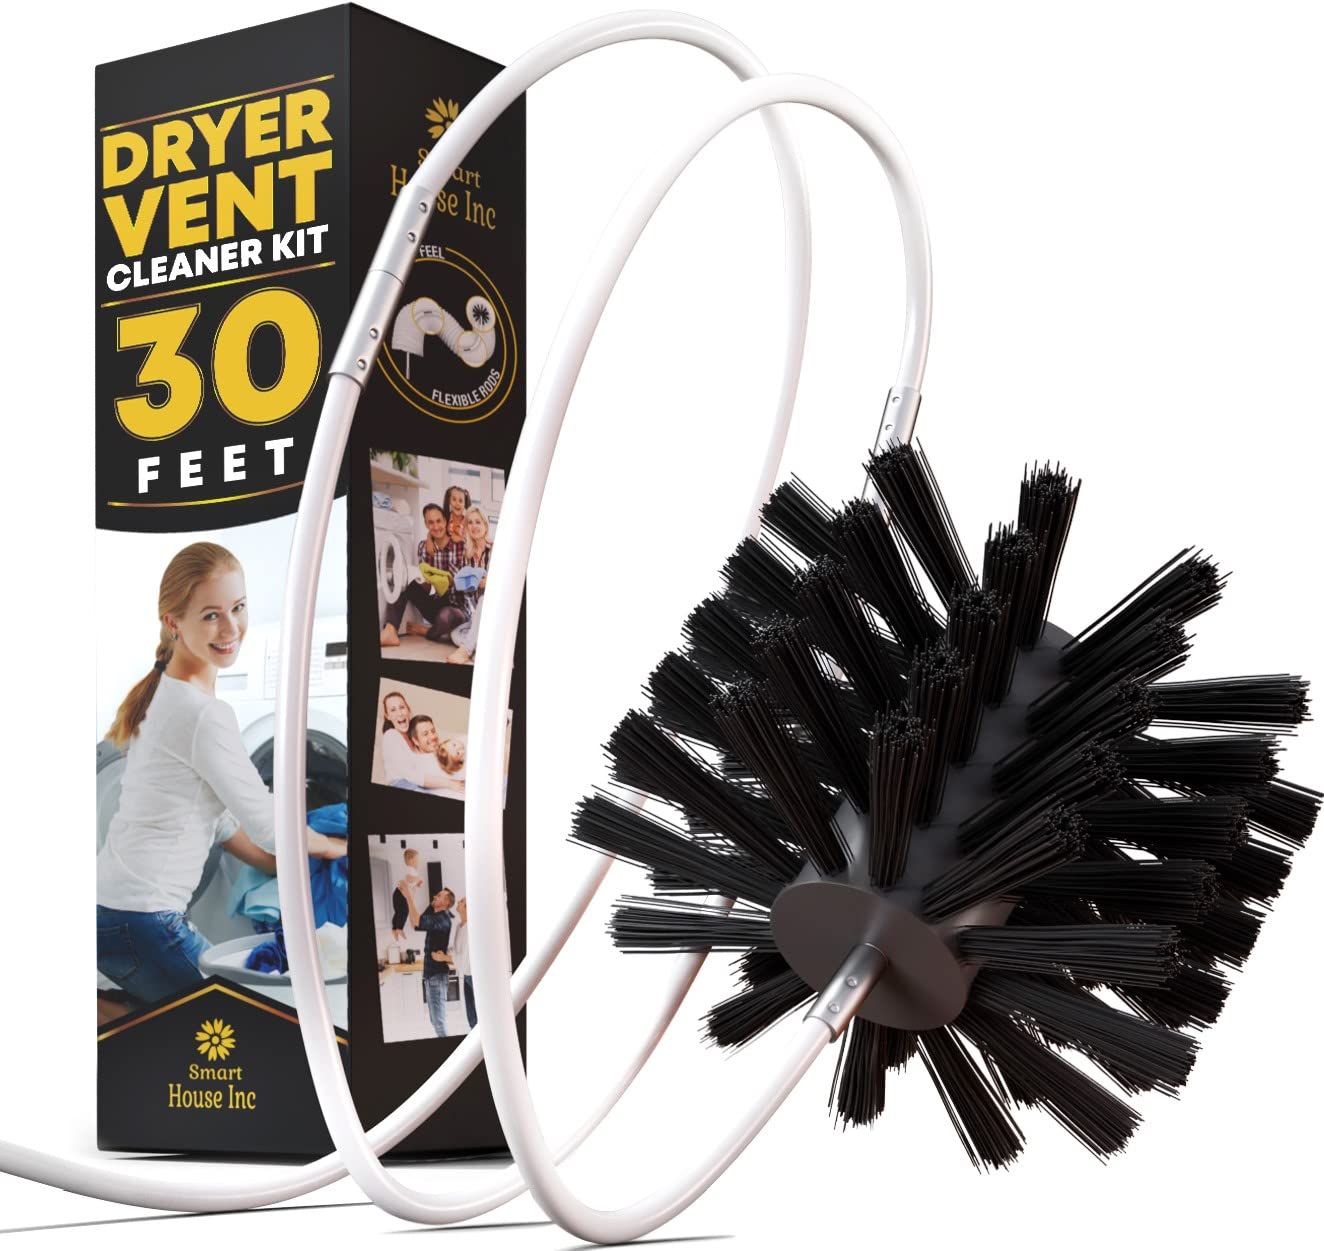 Dryer Vent Cleaner Kit, Lint Remover, Flexible Reusable Strong